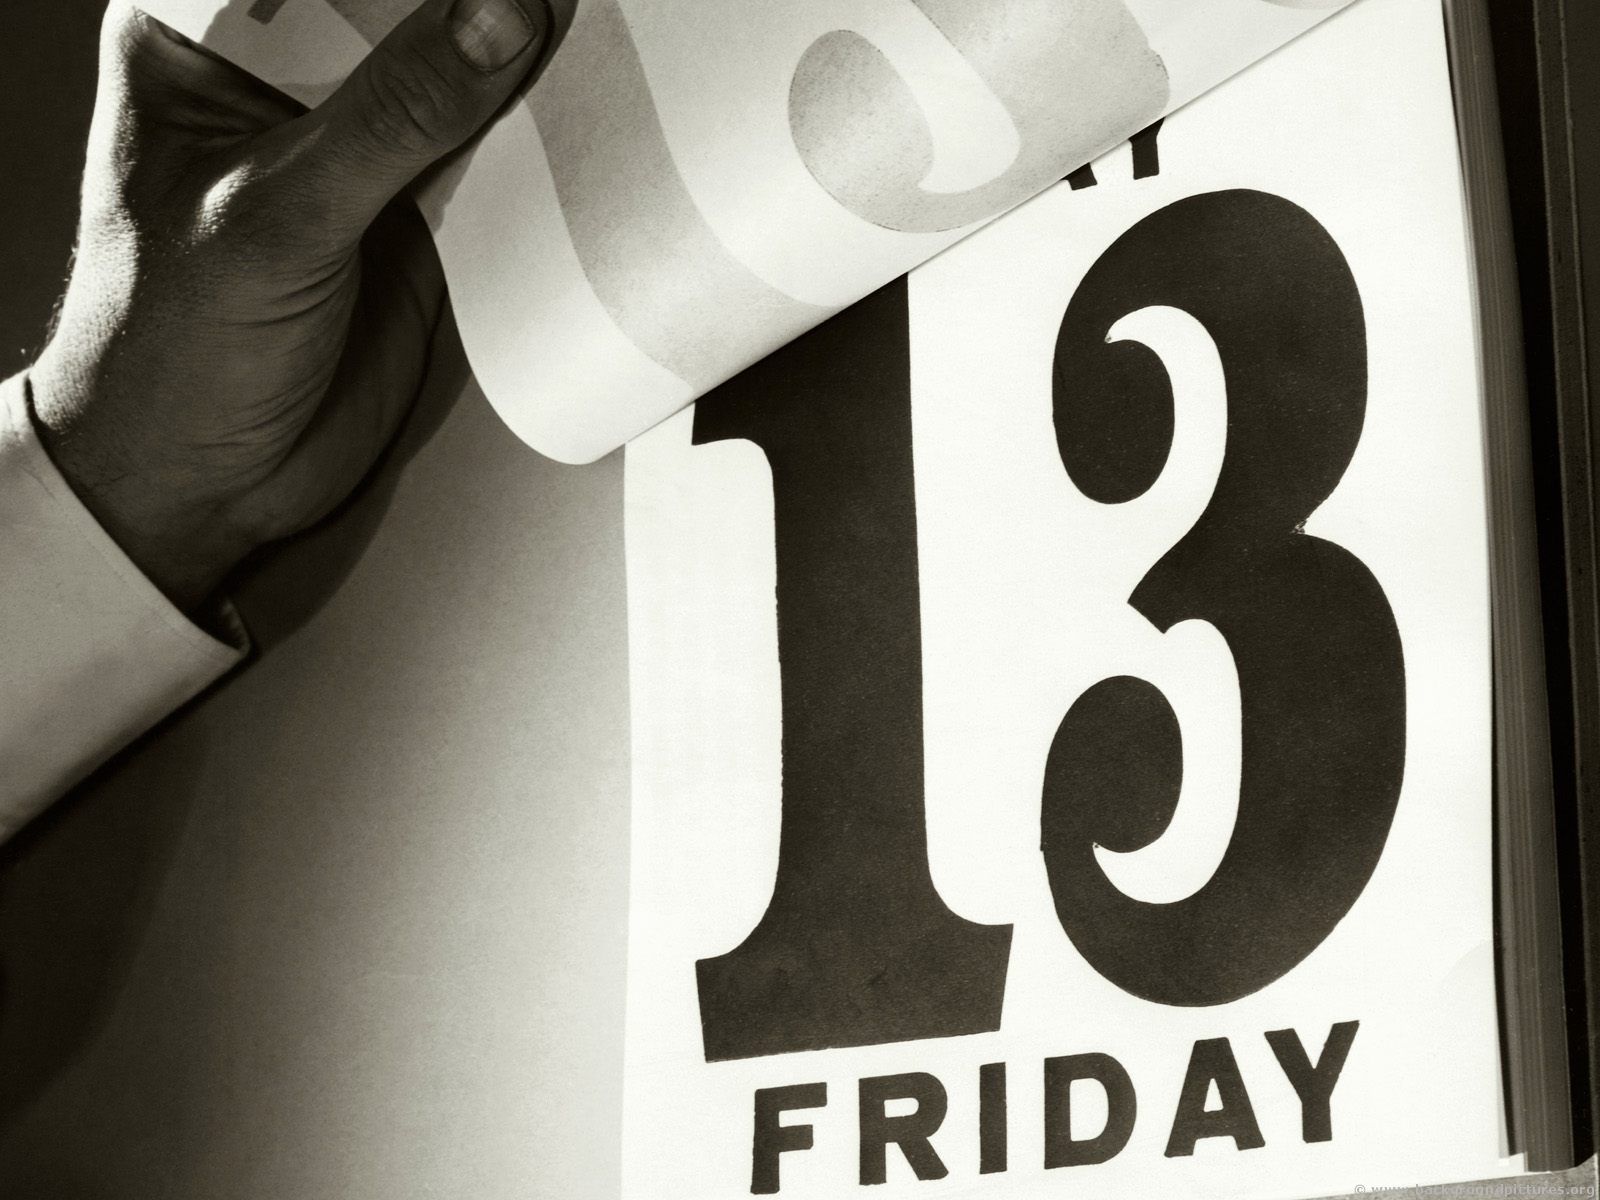 Friday 13 wallpapers and images - wallpapers, pictures, photos